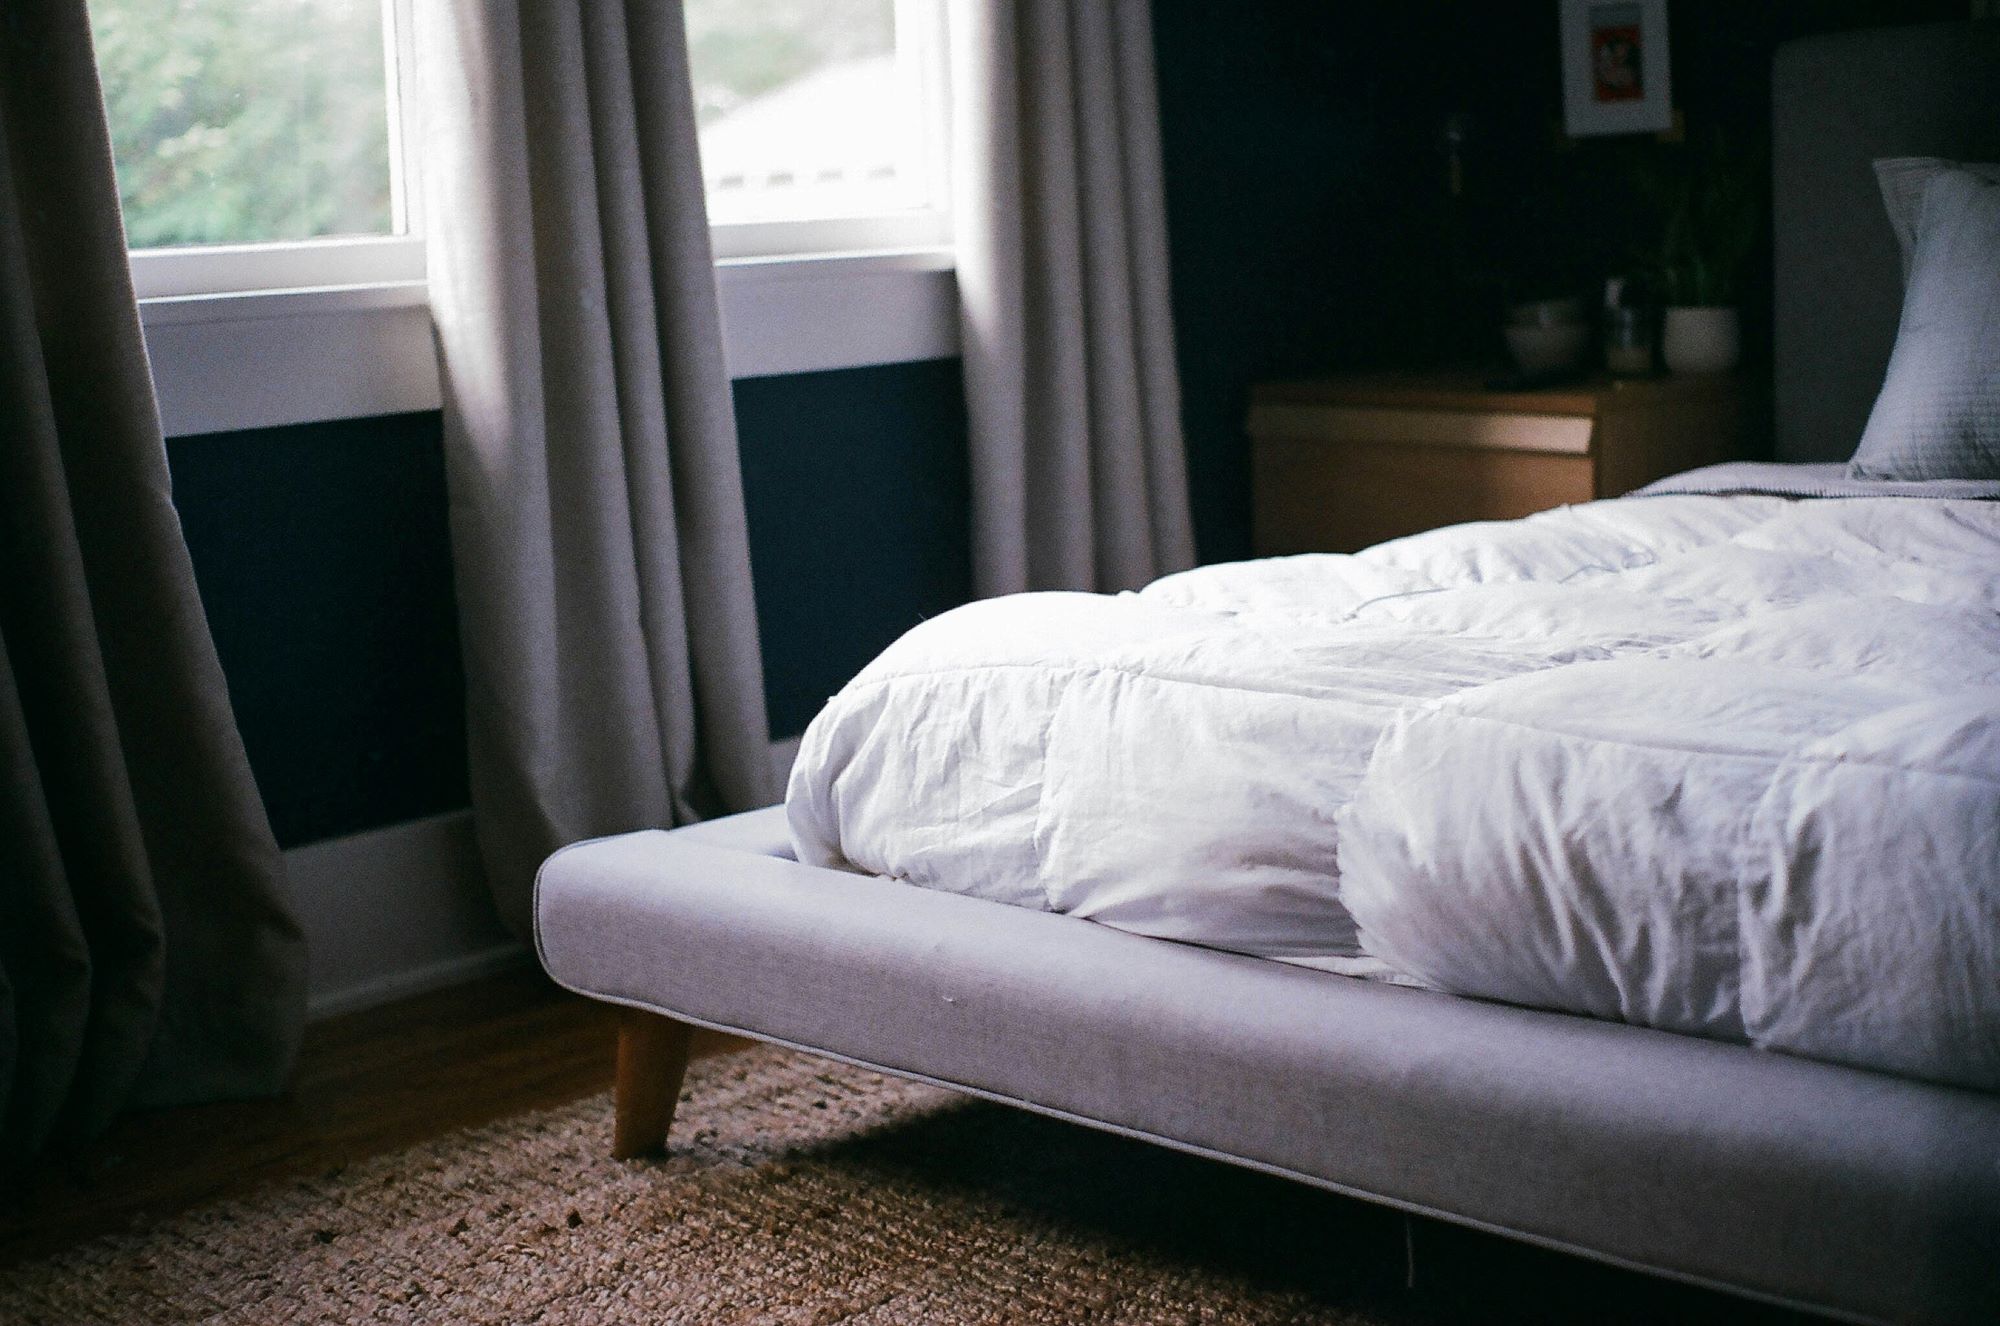 How to choose a quality mattress